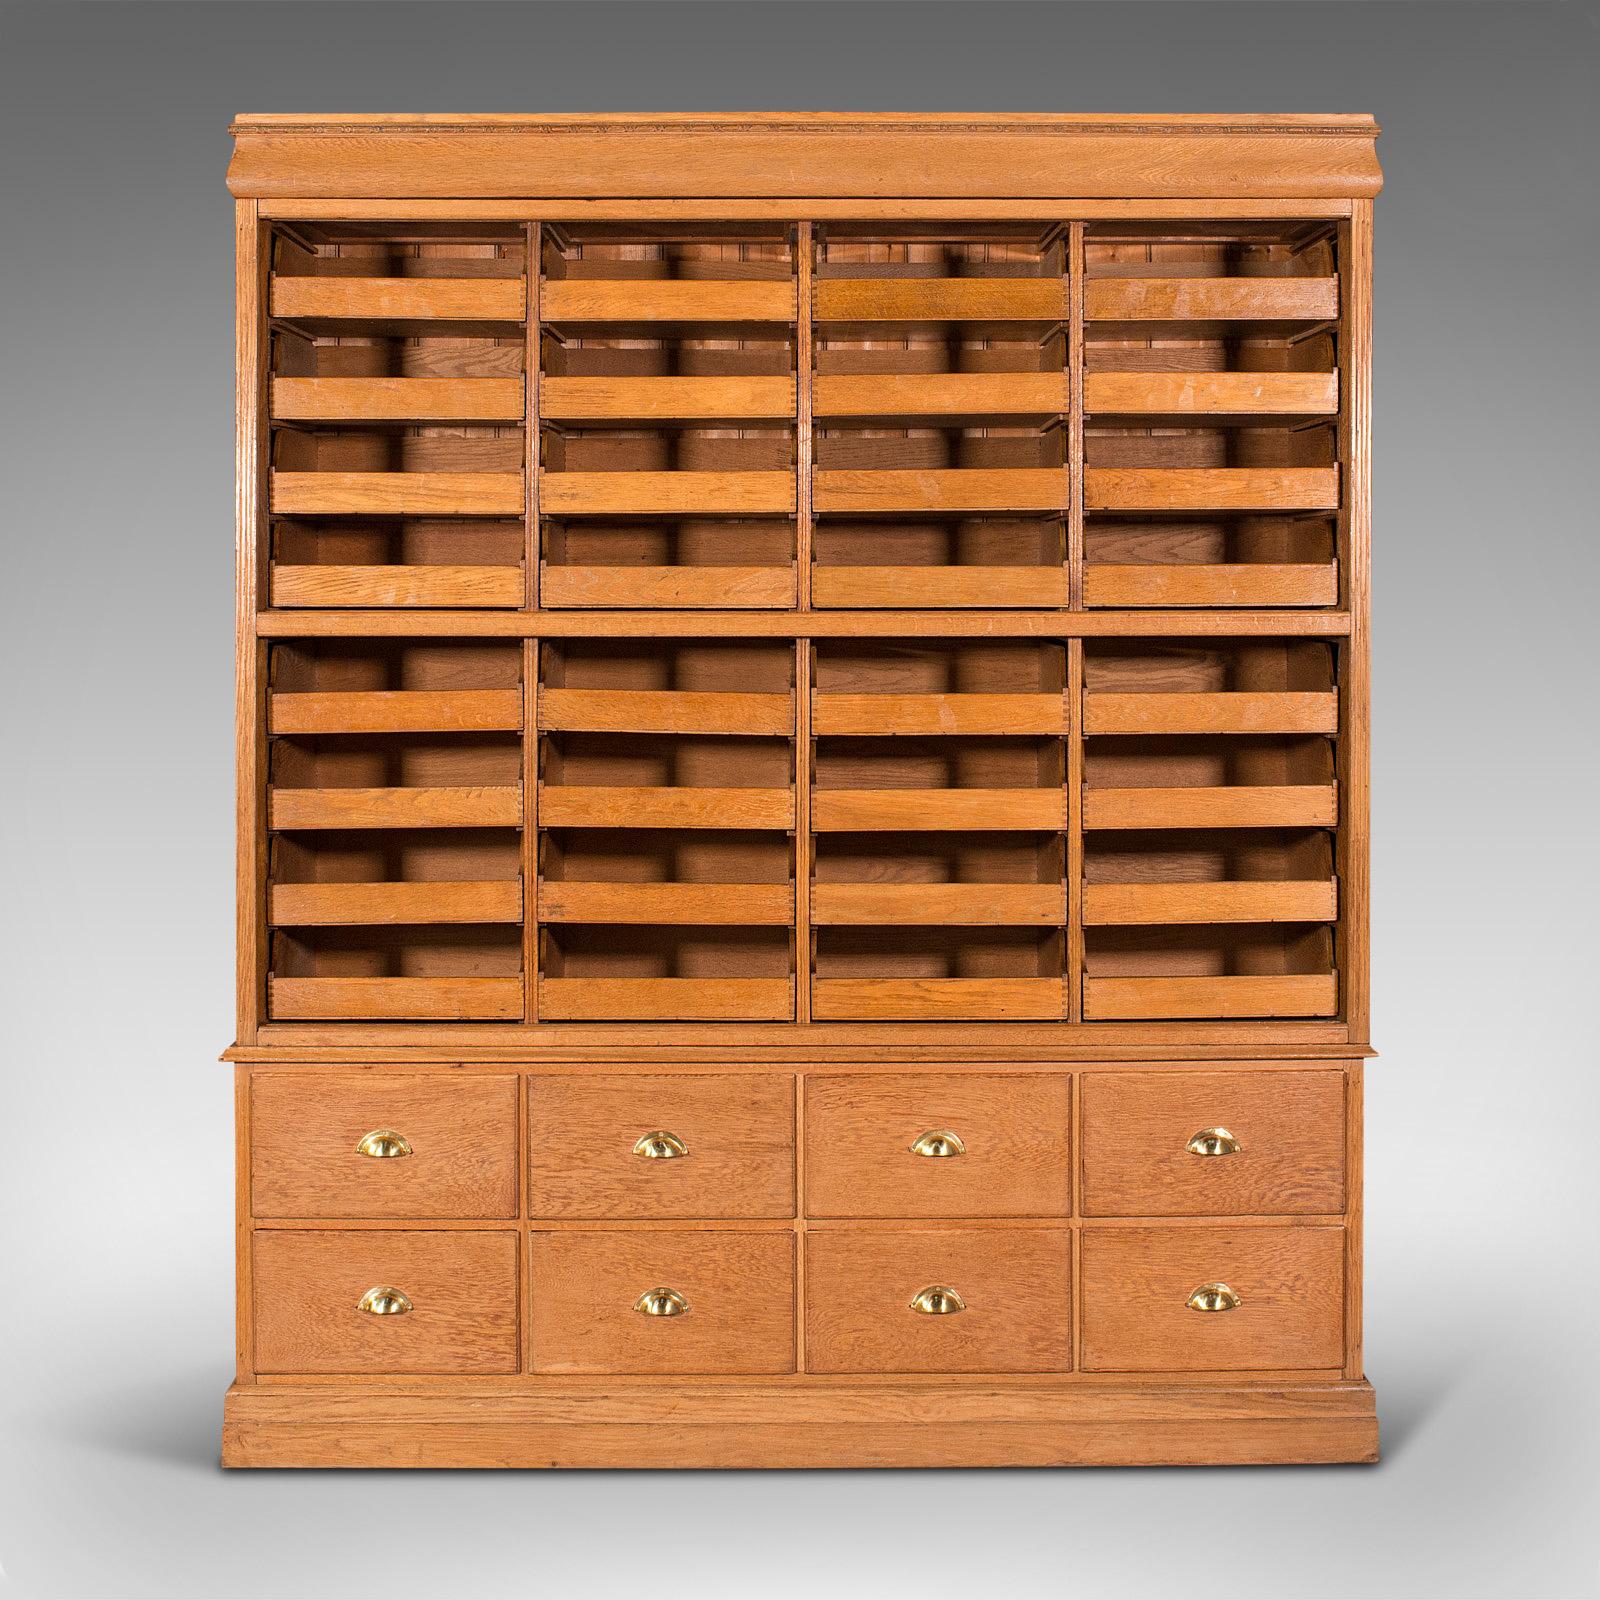 This is a very large antique haberdashery cabinet. An English, oak collector's, shop retail or specimen rack, dating to the Edwardian period, circa 1910.

Superb proportion with generous suite of storage trays
Displays a desirable aged patina